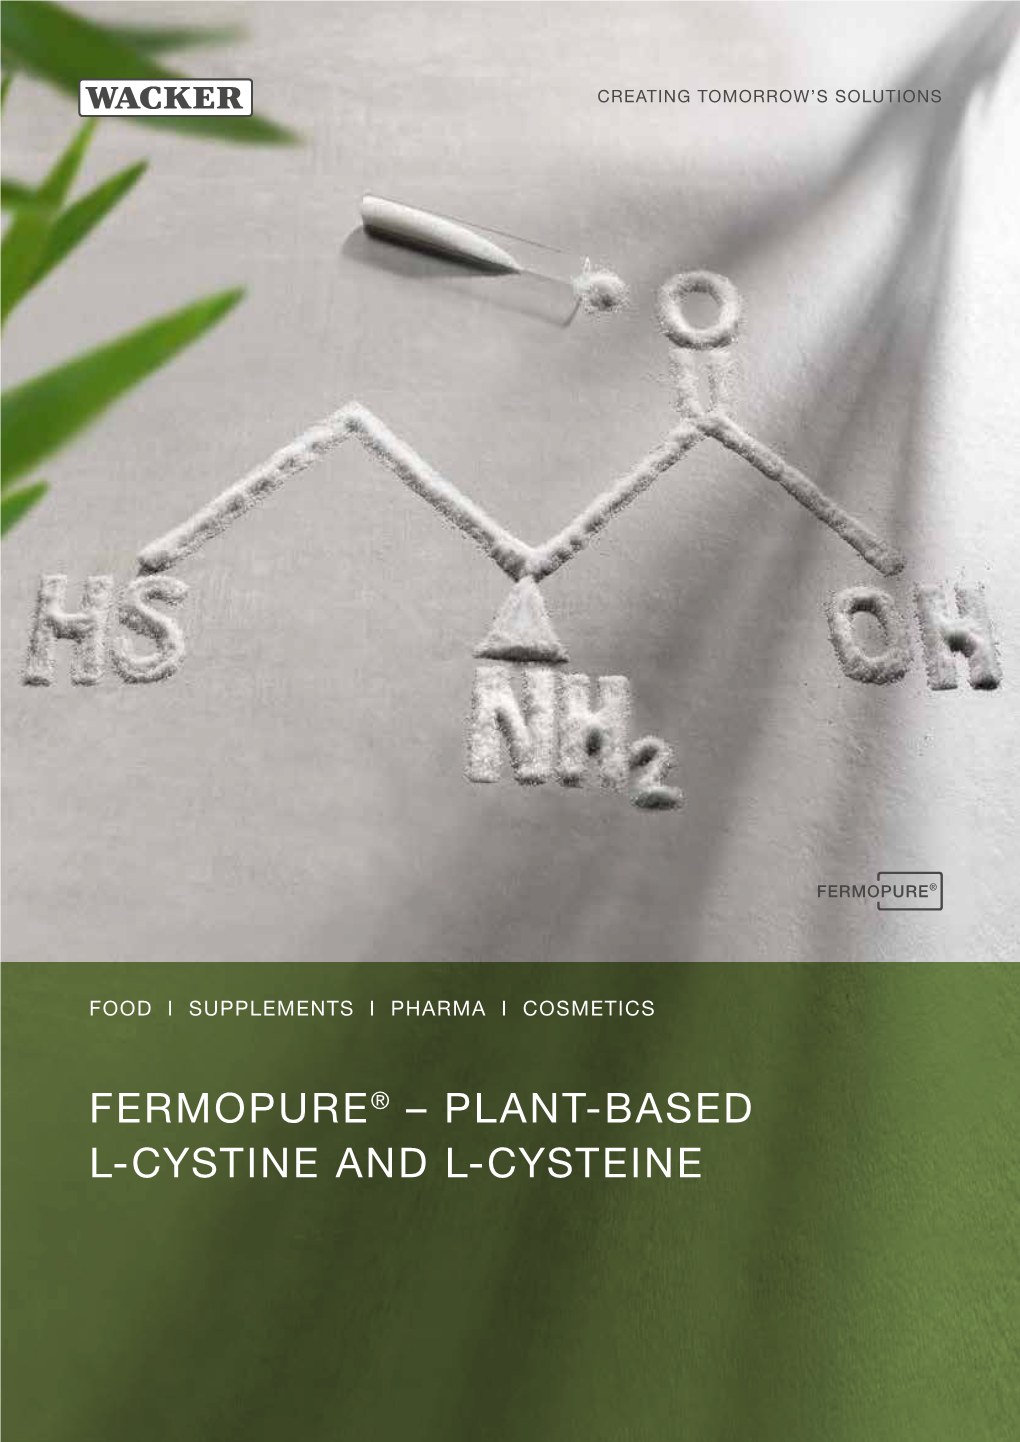 Fermopure® – Plant-Based L-Cystine and L-Cysteine Trusted Expertise in Biotech